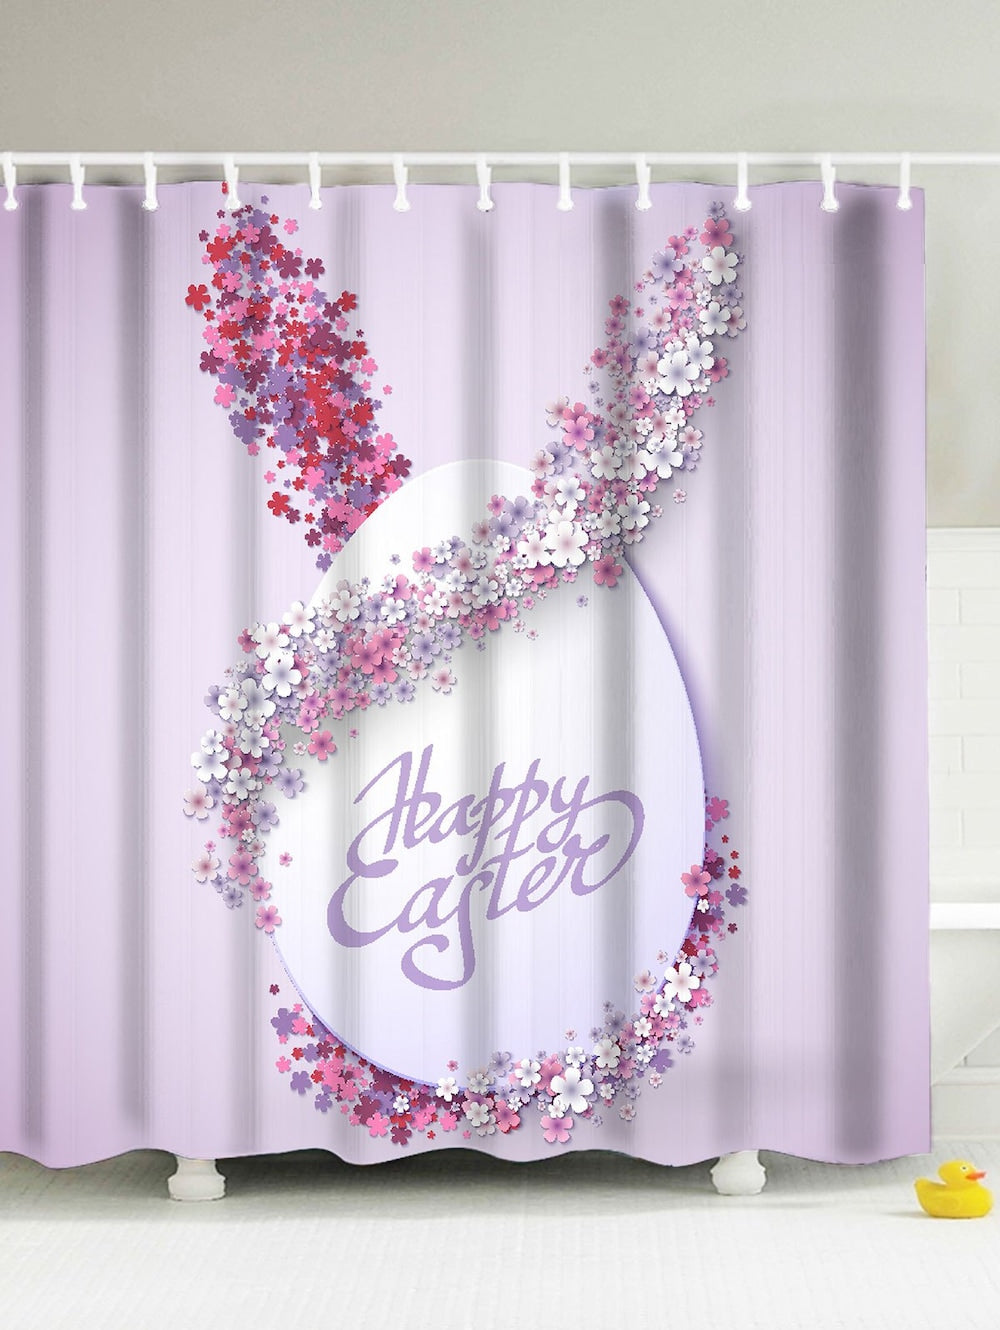 Easter Flora Rabbits Ears with Eggs Shower Curtain | GoJeek